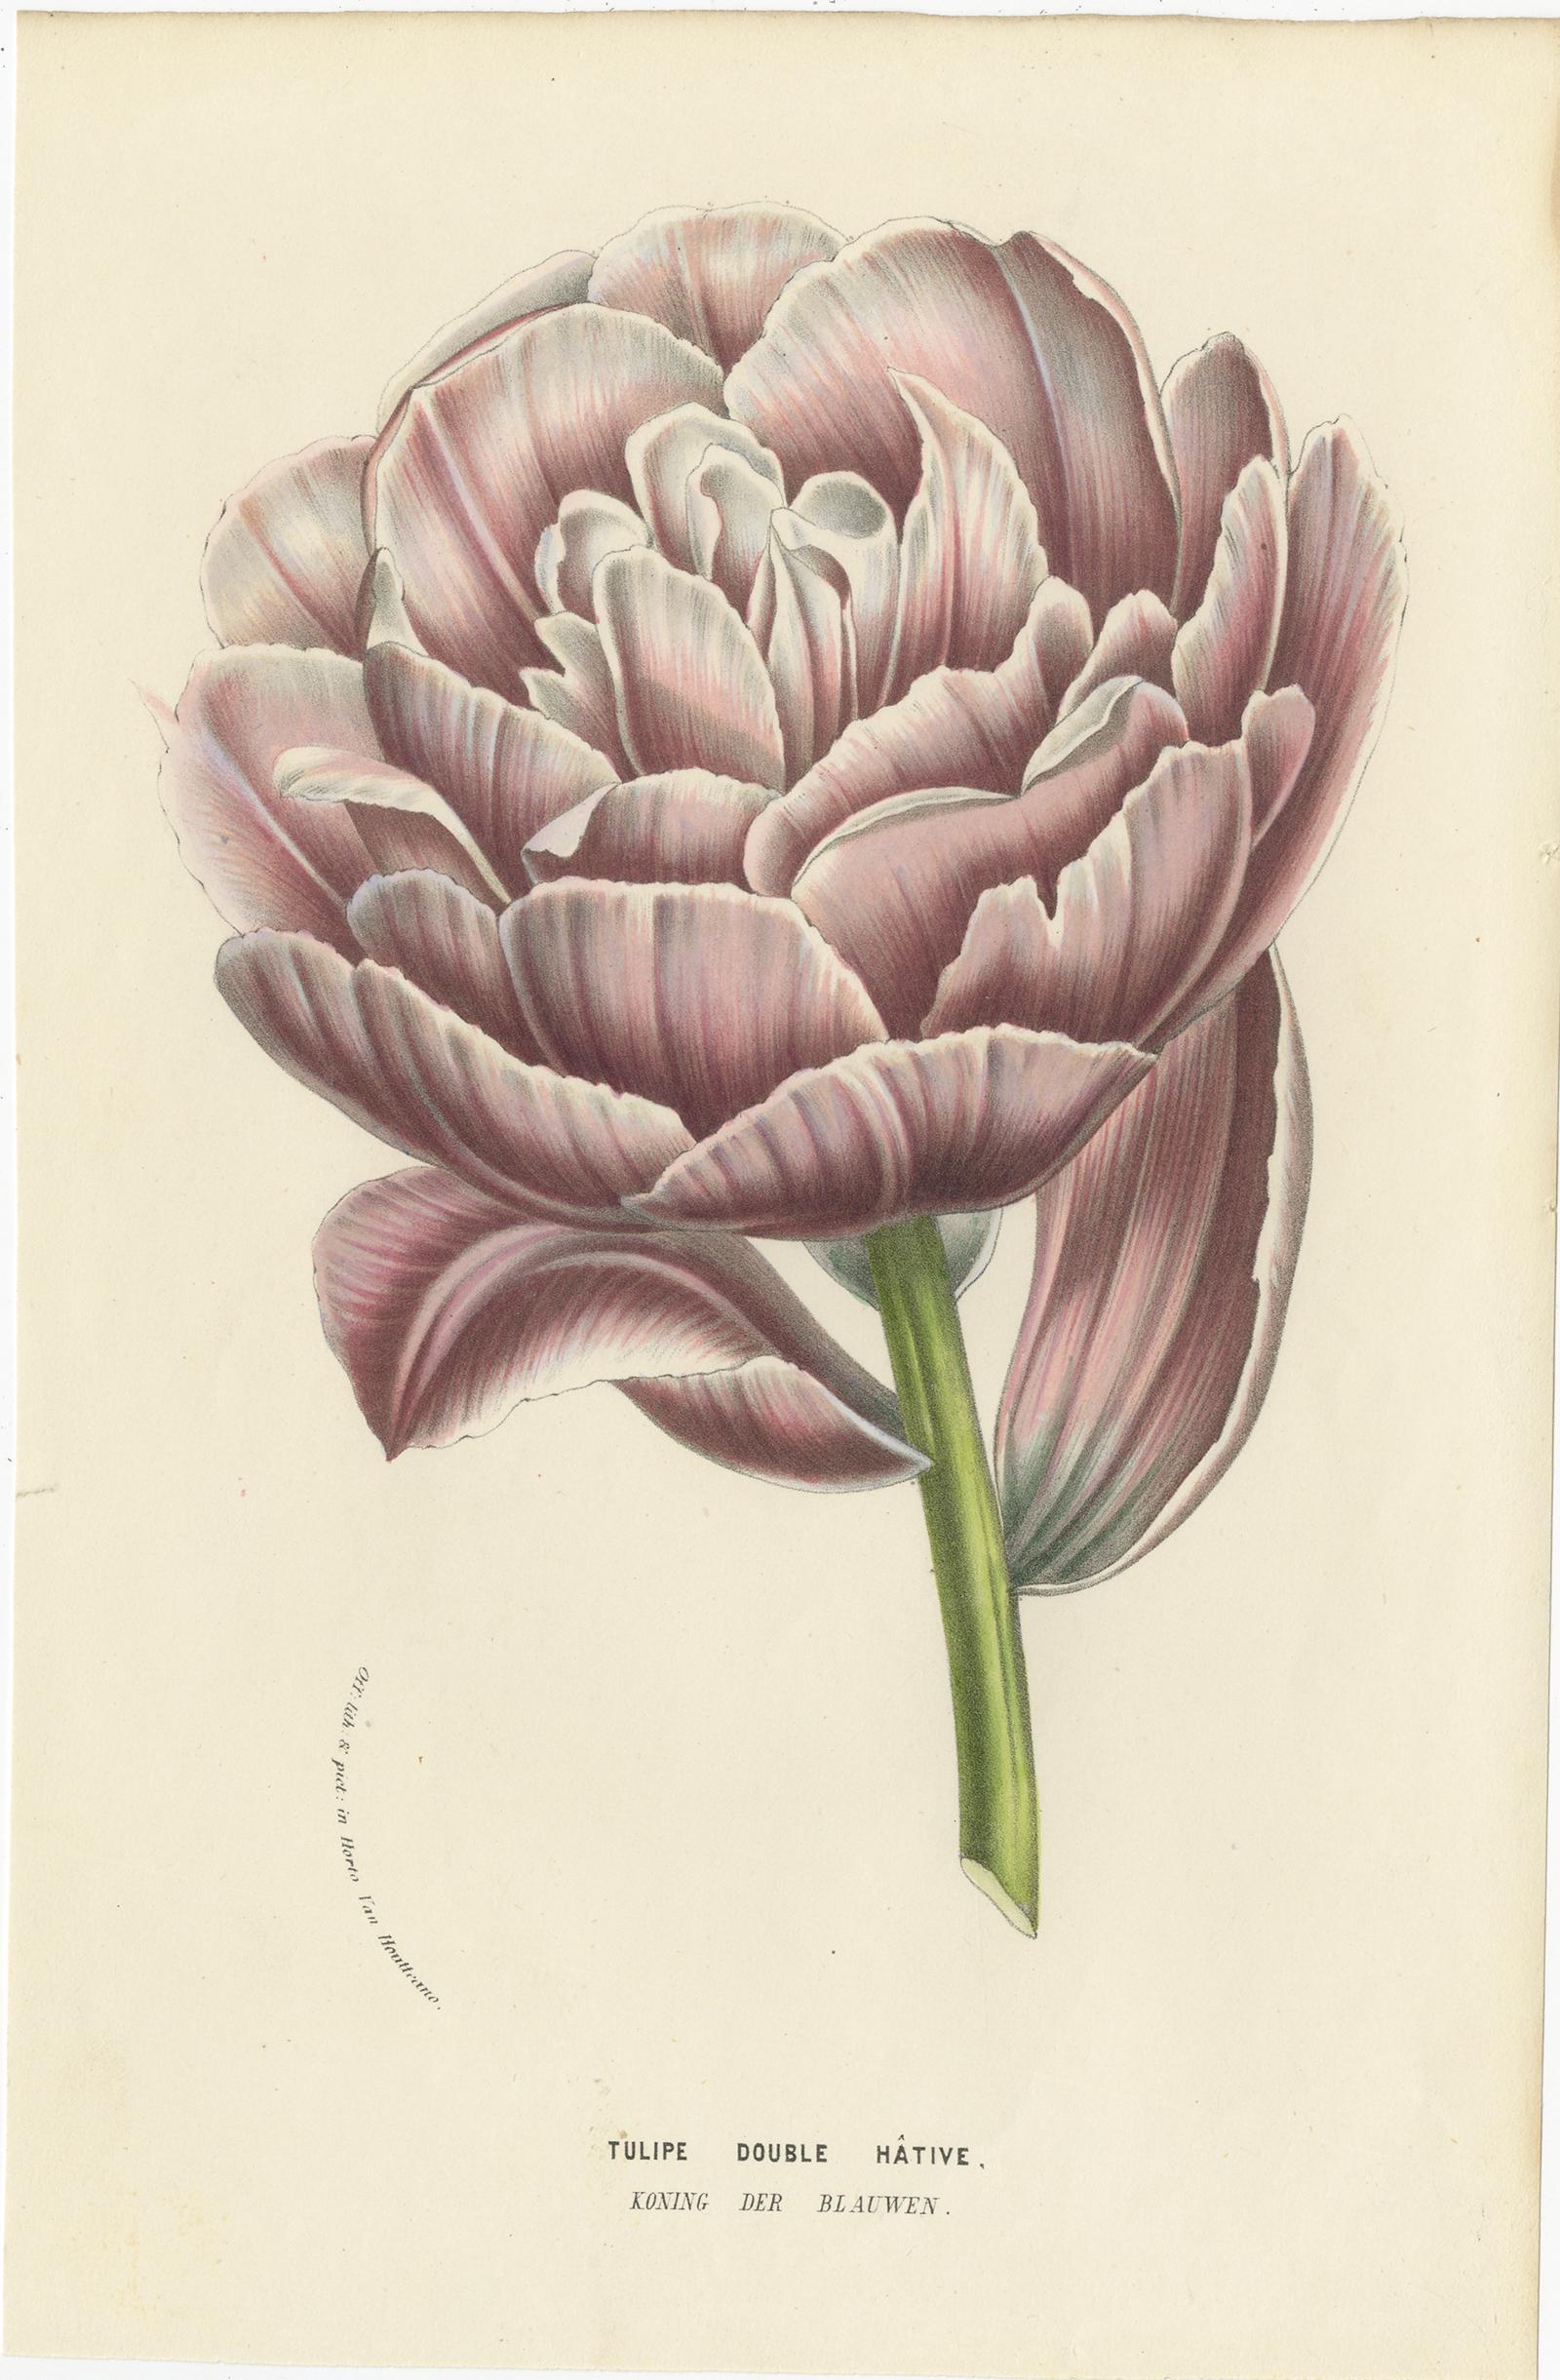 Paper Set of 2 Antique Botany Prints of Various Tulips by Van Houtte, 1857